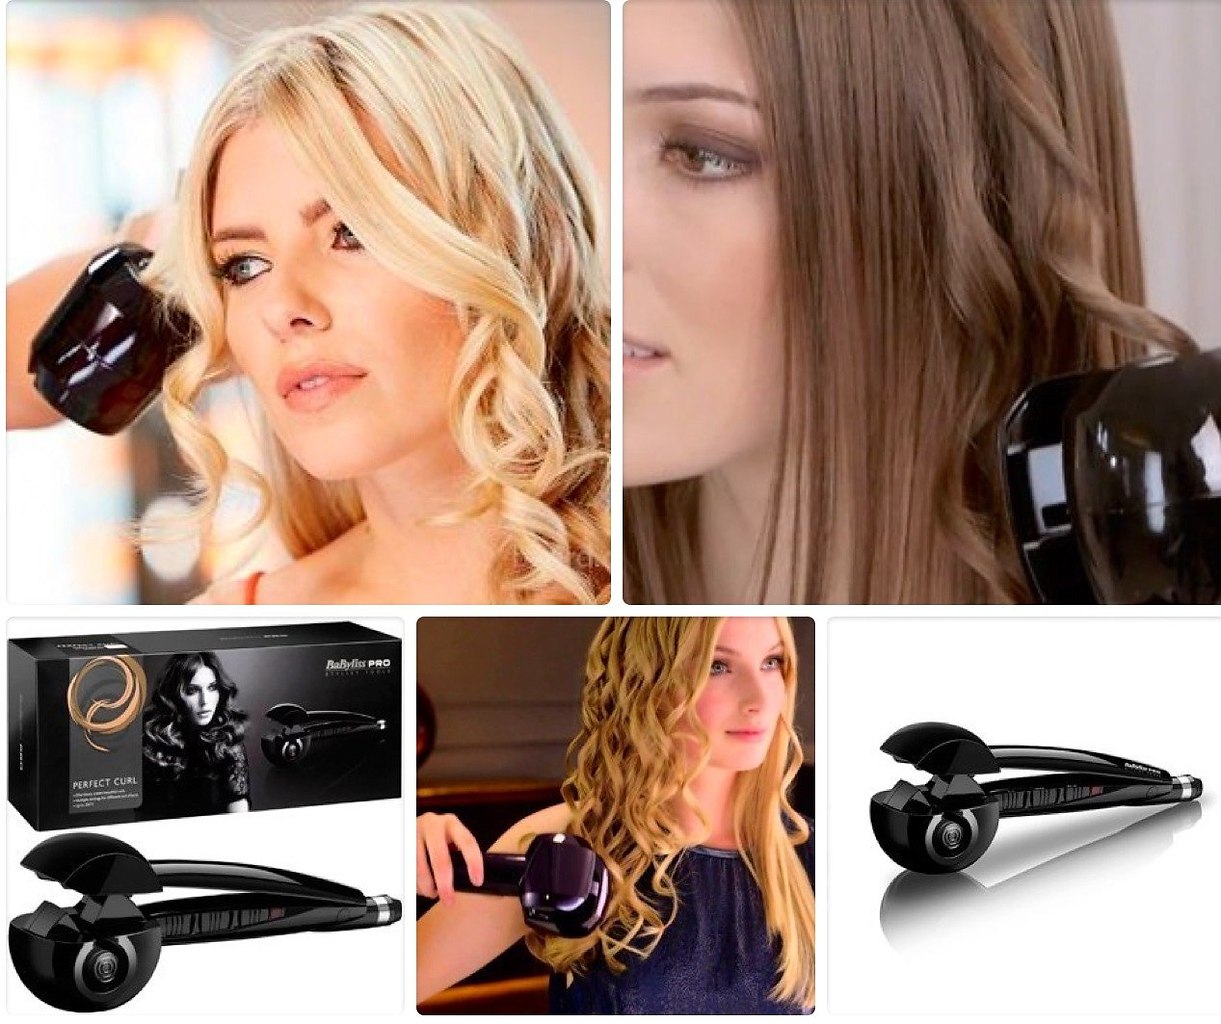 Pro perfect curl. Стайлер BABYLISS Pro perfect Curl. Стайлер BABYLISS Pro Curl. Плойка BABYLISS Pro Curl. Стайлер BABYLISS 2664pre.